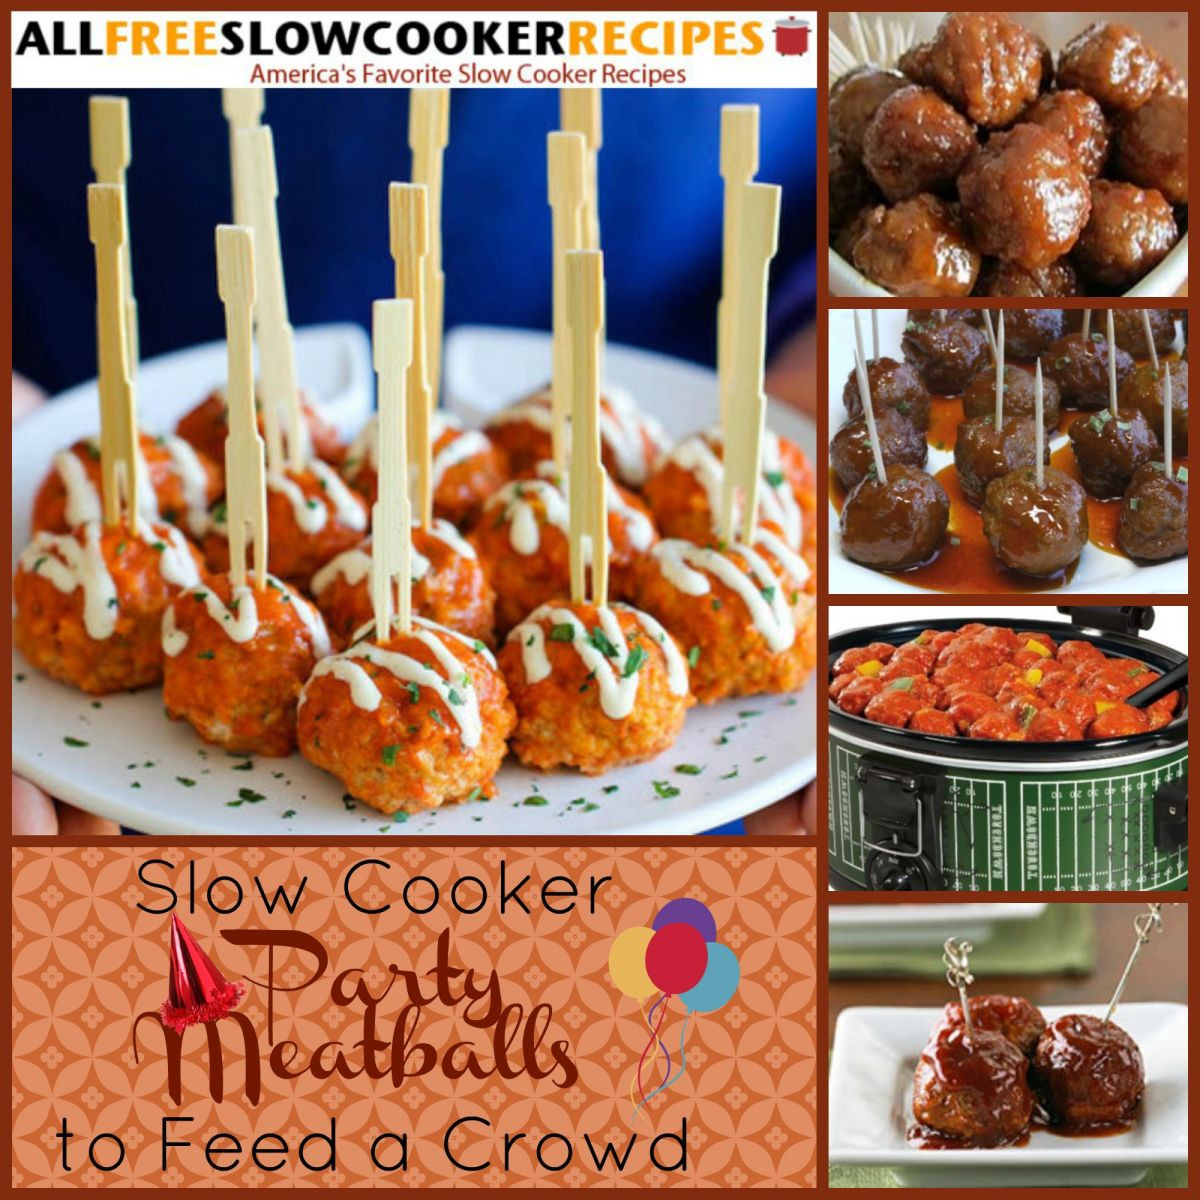 Slow Cooker Appetizers For Party
 Slow Cooker Party Meatballs Recipe 6 Bonus Party